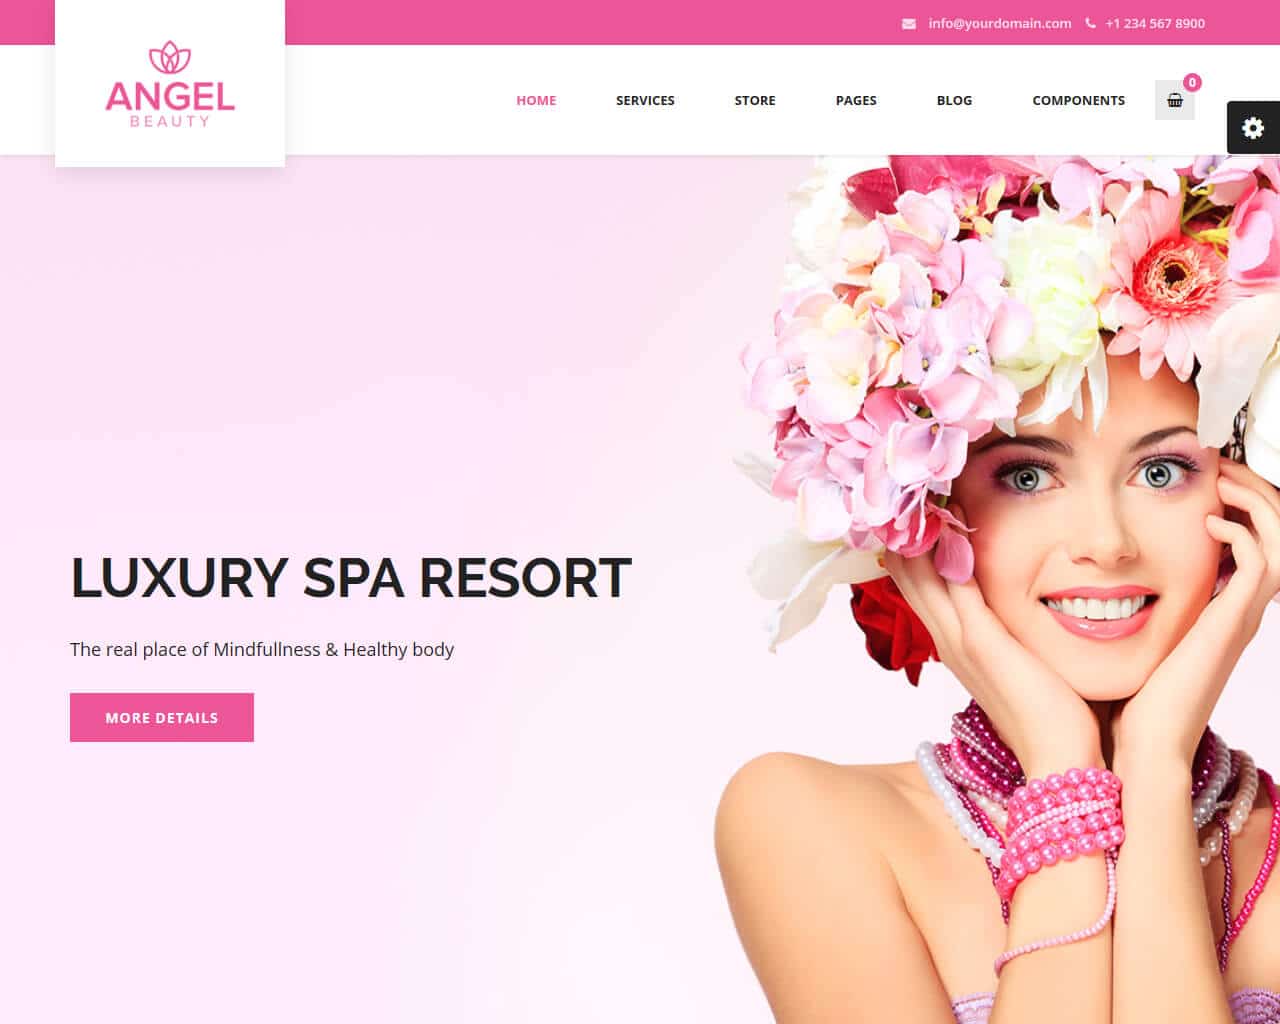 20 Best Beauty Salon and Spa Website Templates 2022